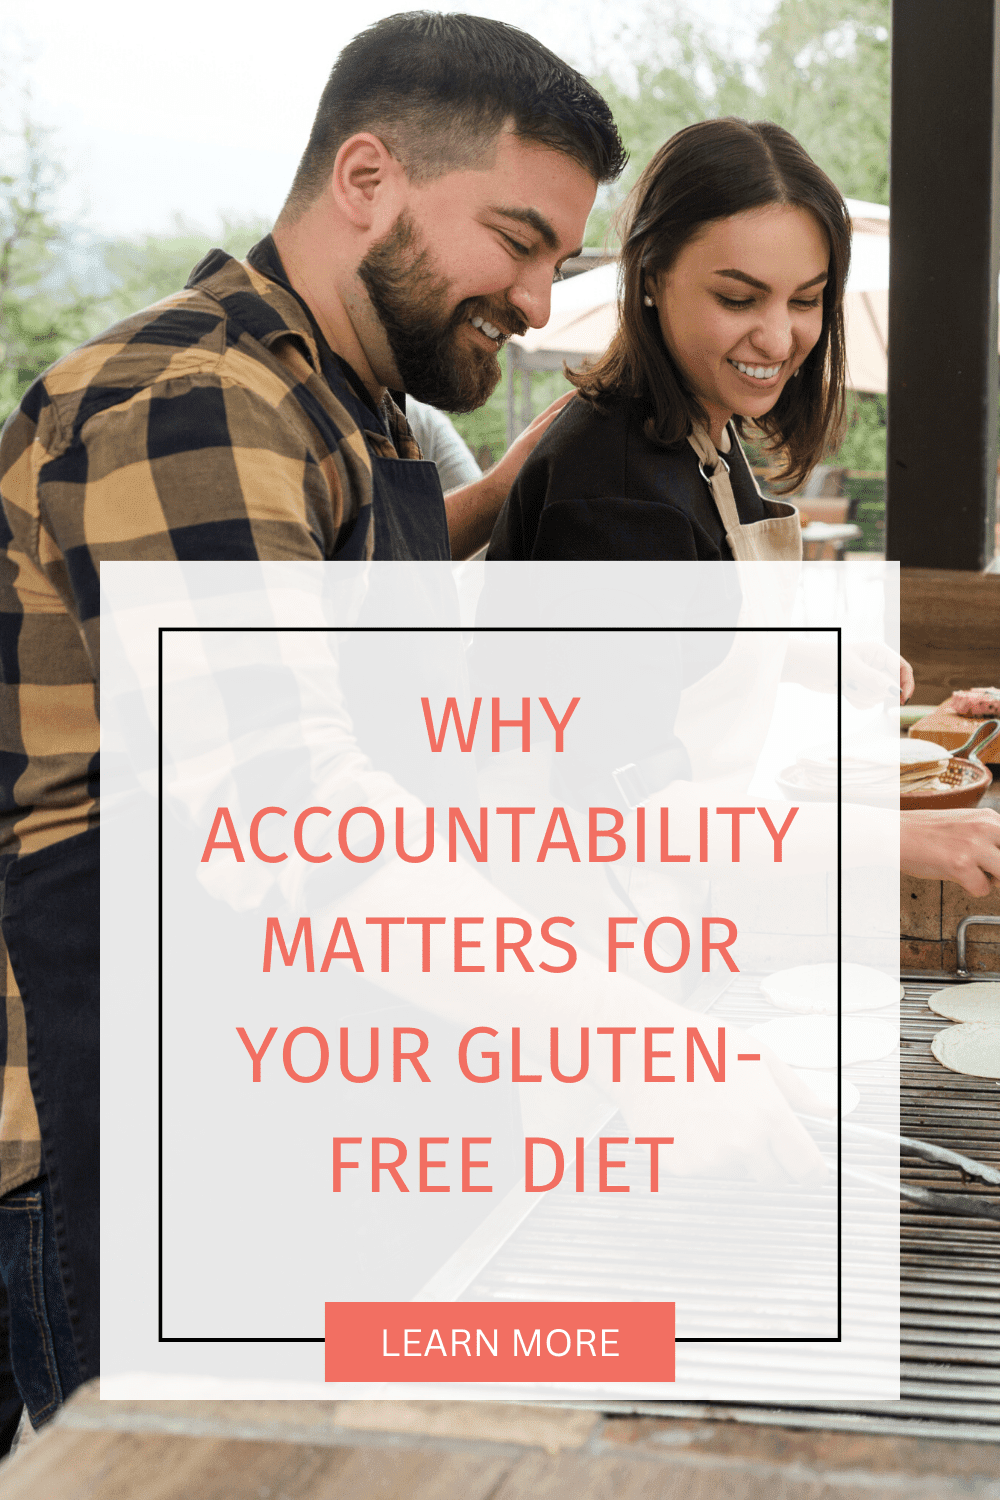 Why Accountability Matters on Your Gluten-Free Diet